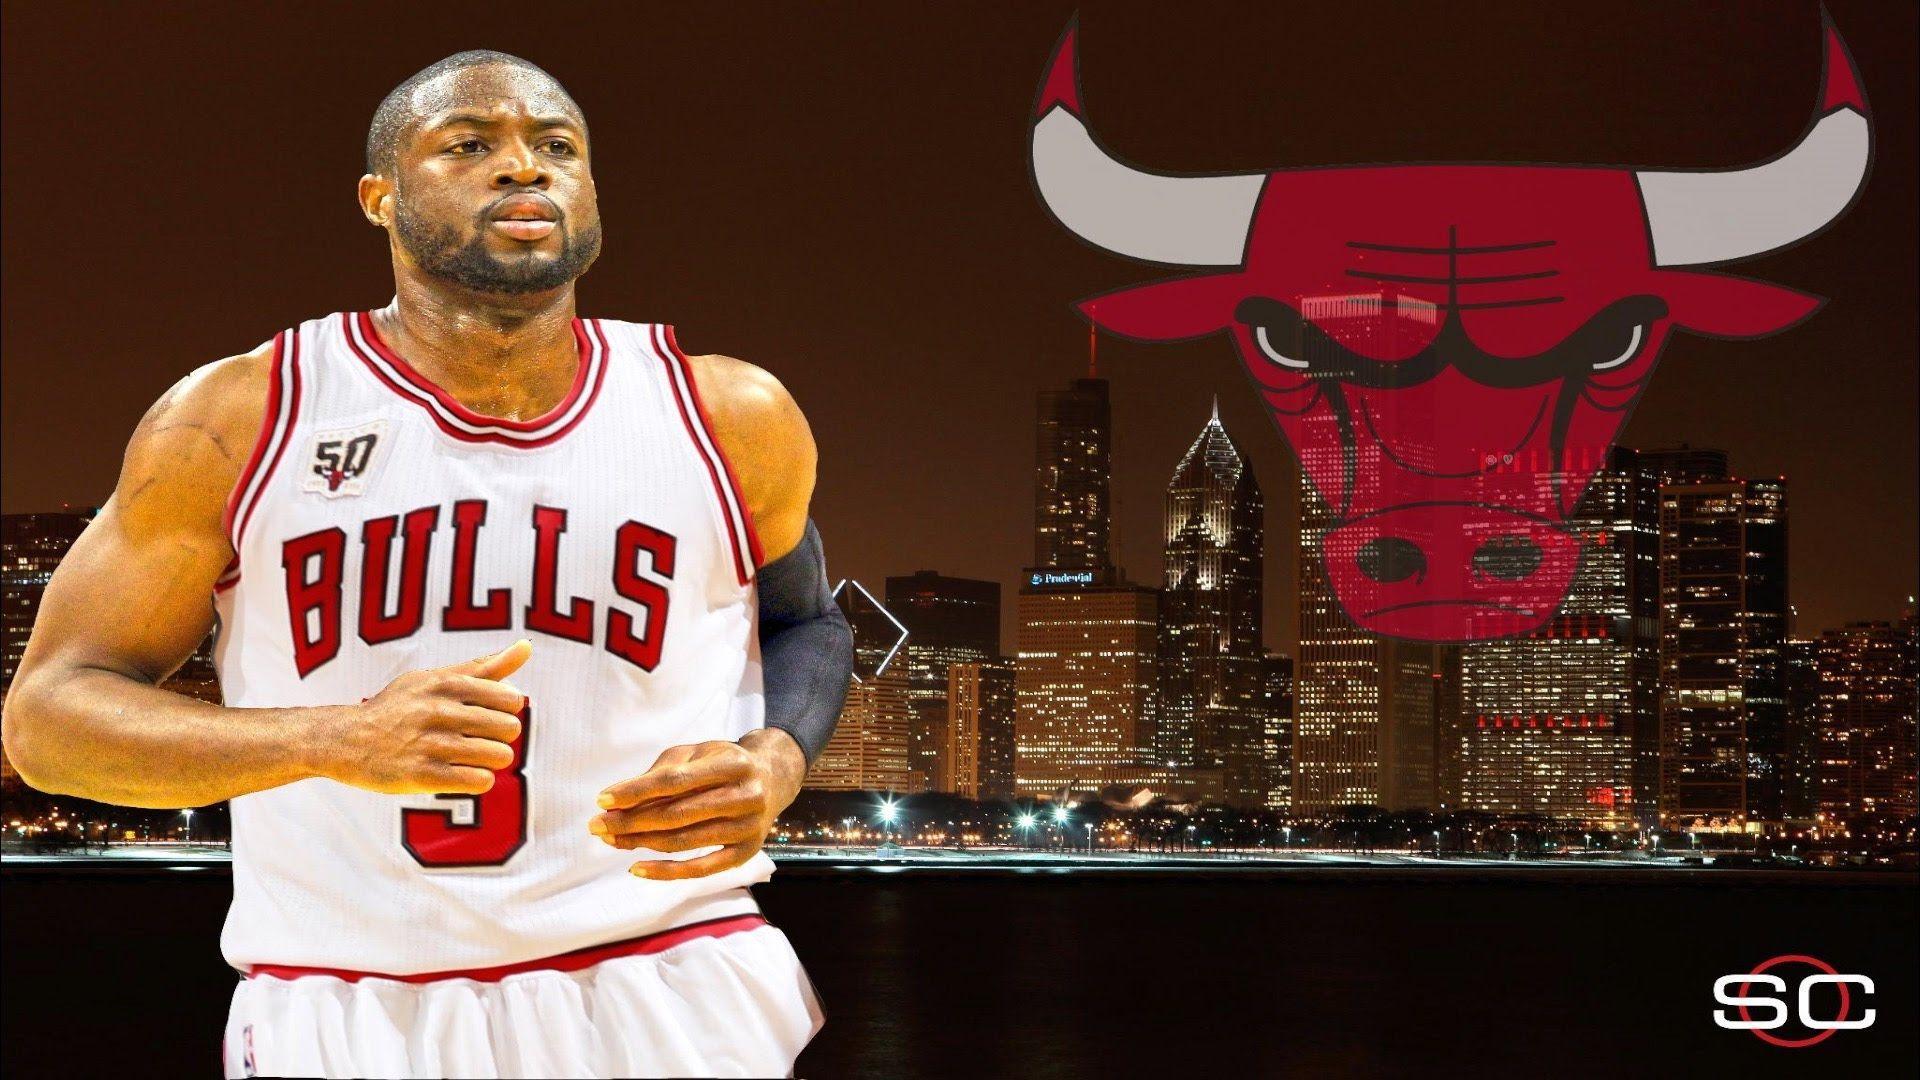 DIEHARD BULLS FAN REACTION TO DWYANE WADE SIGNING WITH THE CHICAGO